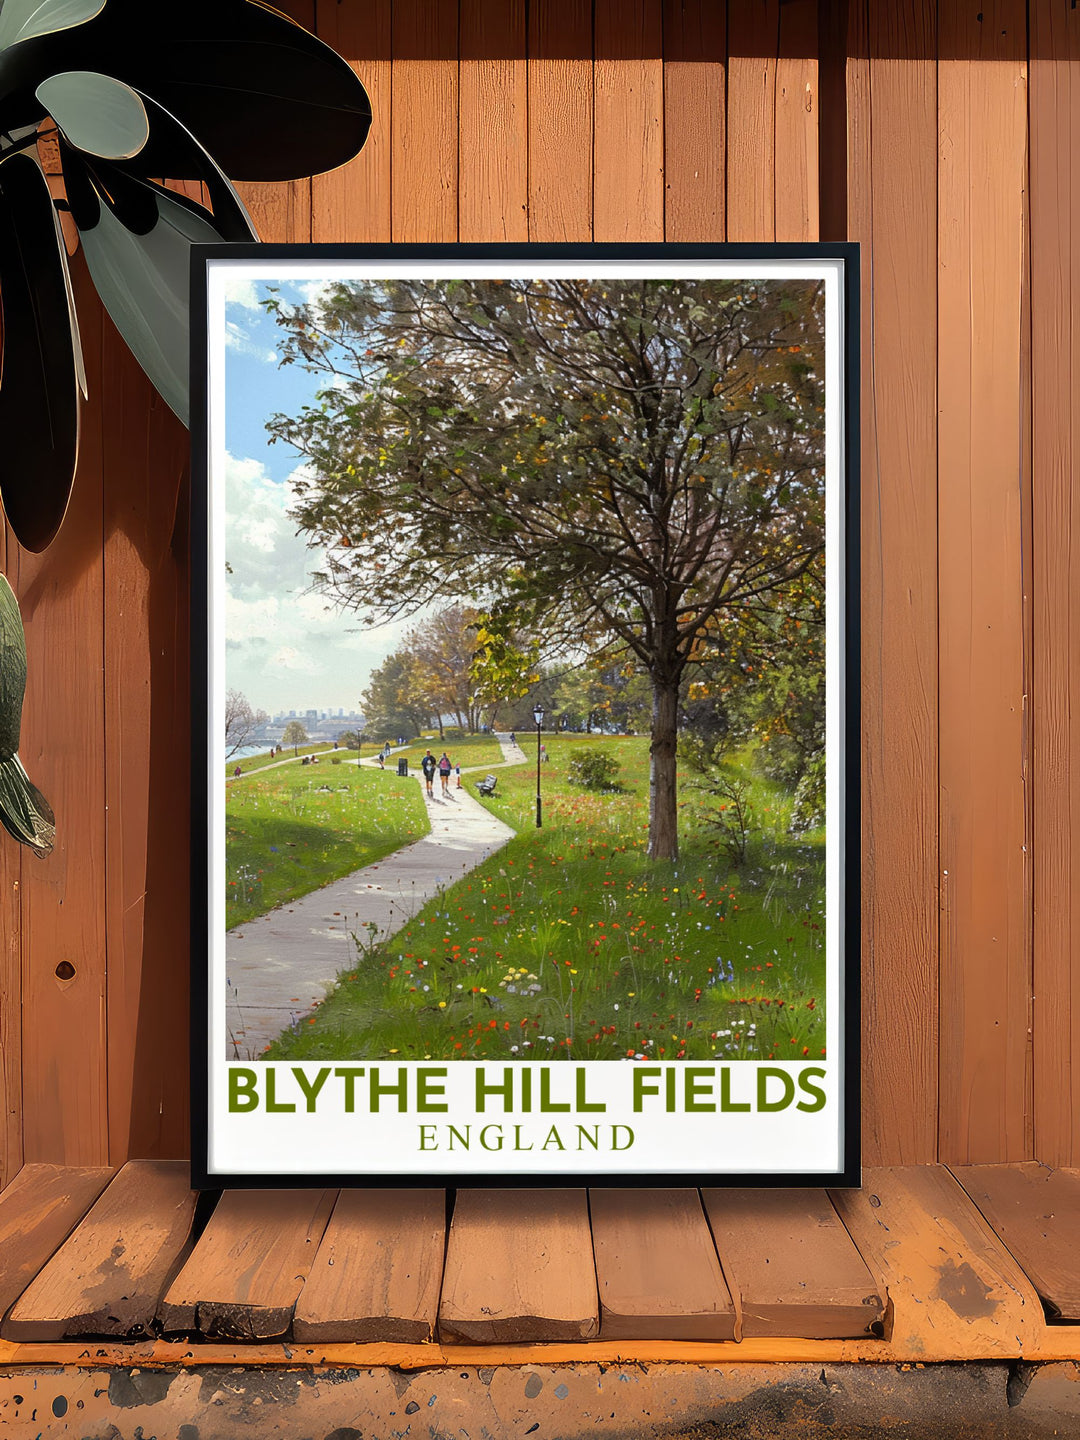 The charm of Blythe Hill Fields, with its blend of natural beauty and urban vistas, is brought to life in this poster, offering a piece of Londons park allure for your home.